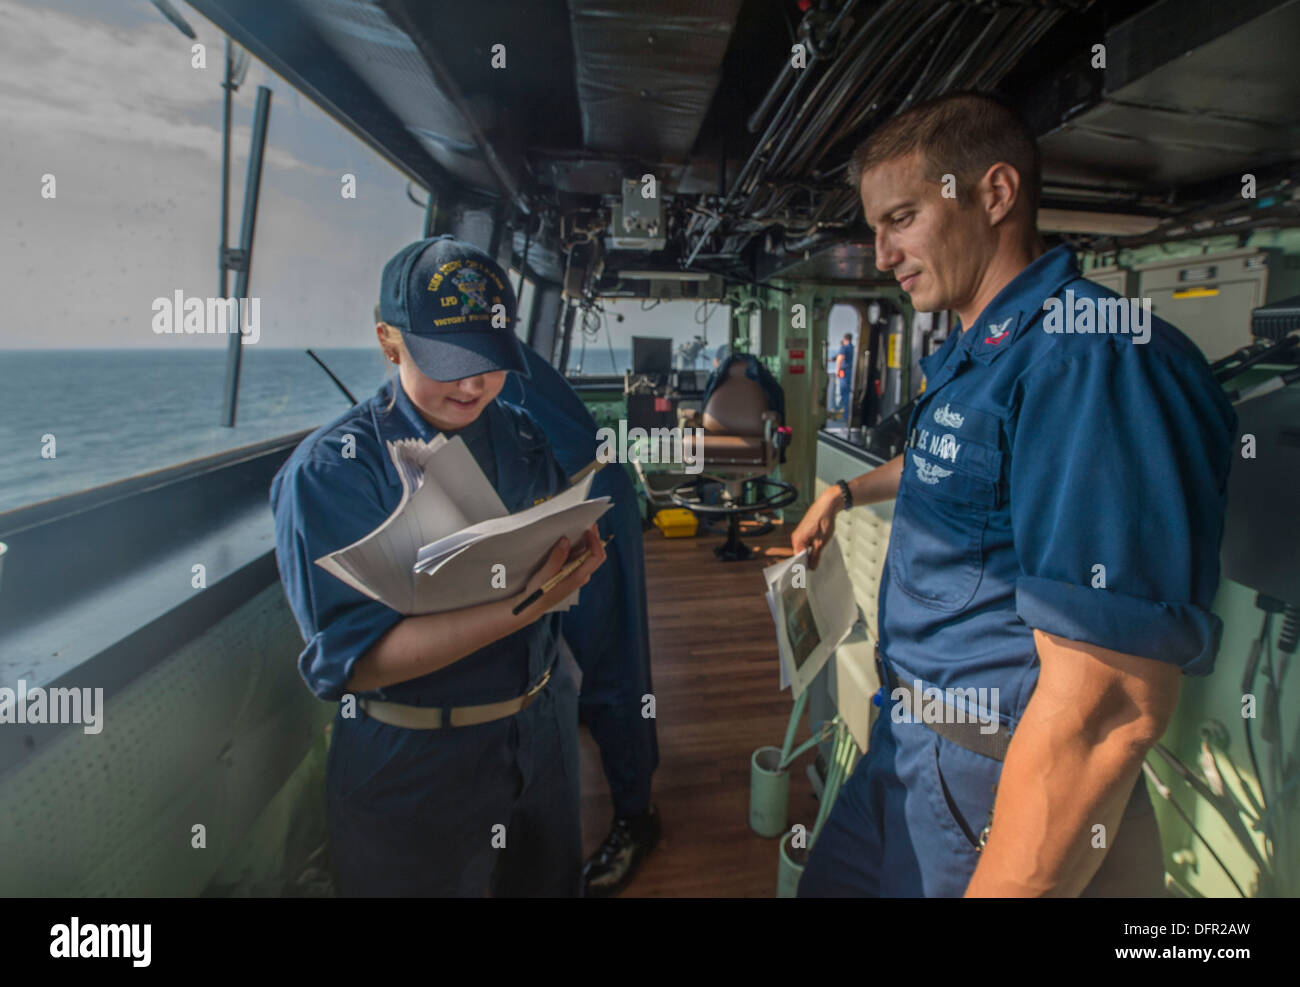 Mass Communication Specialist 2nd Class Gary Granger gives photos to be released to Lt. j.g. Sidney Cheek on the bridge of the amphibious transport dock USS New Orleans (LPD 18). New Orleans is currently deployed in the U.S. 7th Fleet area of responsibili Stock Photo